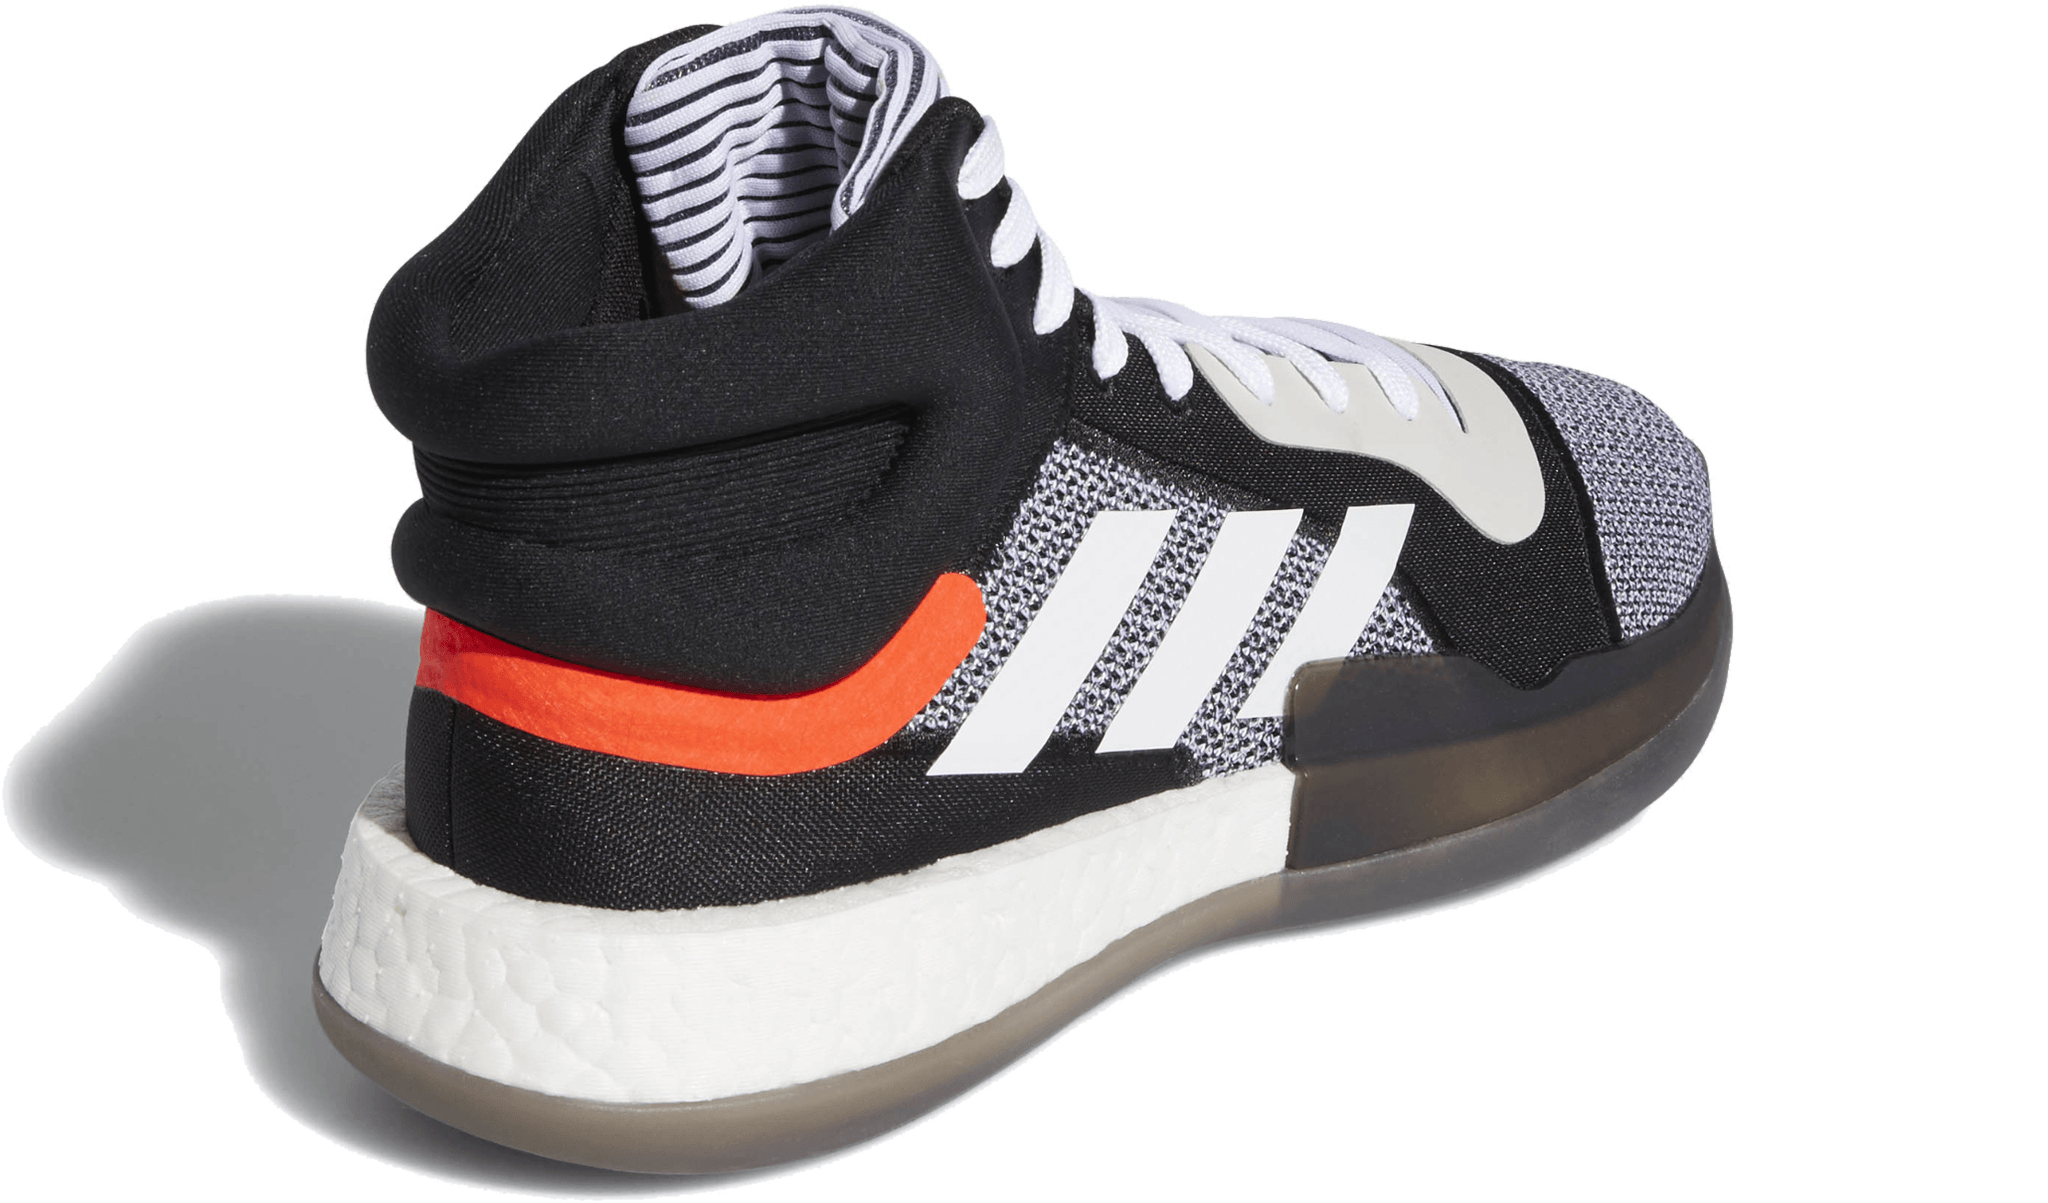 adidas marquee boost mid review